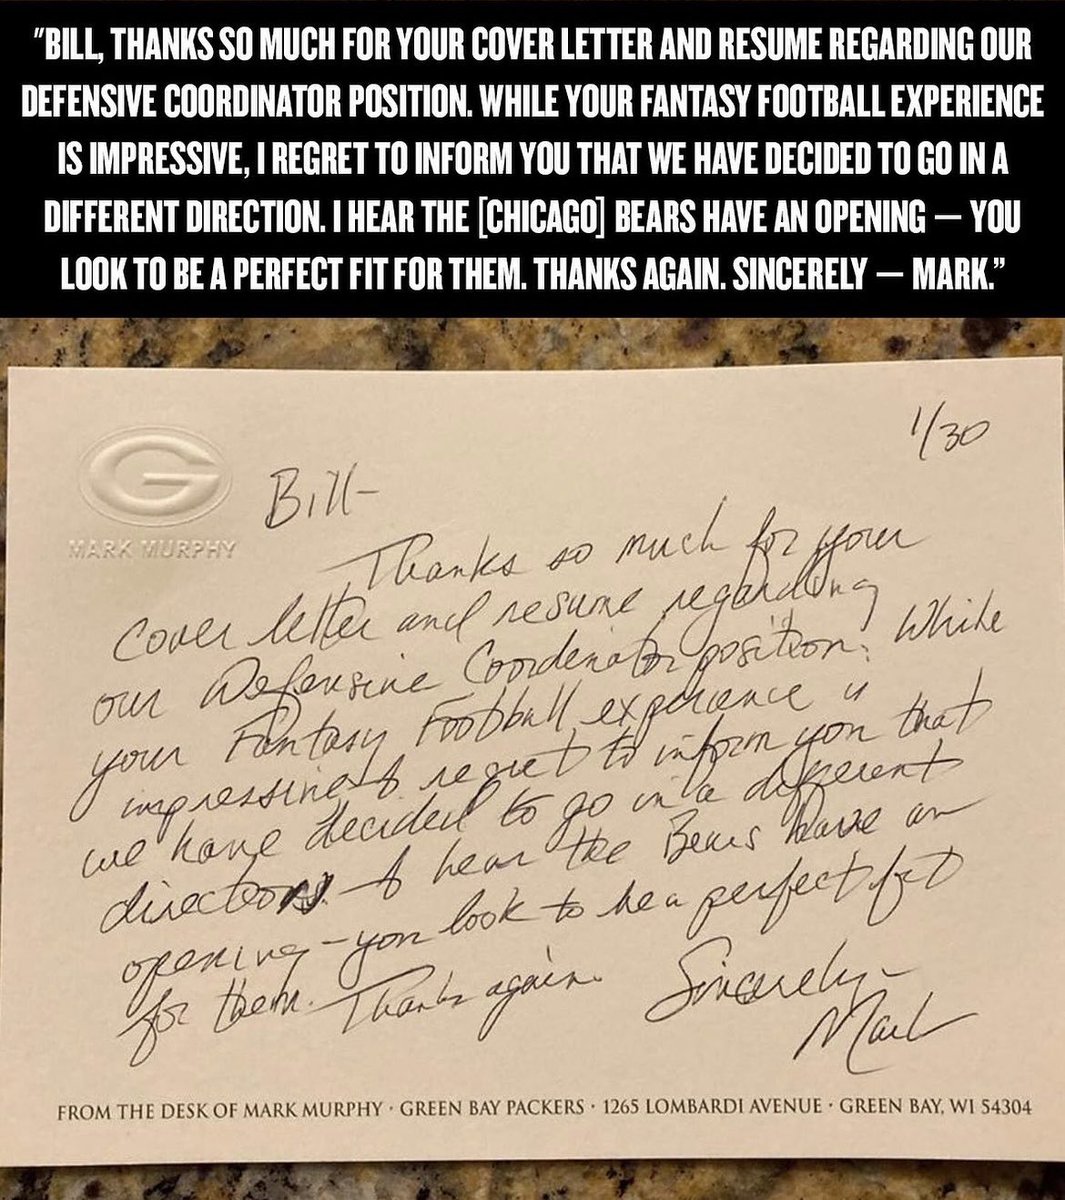 A Green Bay Packers fan applied for the Packers Defensive Coordinator position opening & received a hand written letter back from the President & CEO Mark Murphy. This is the response he got LOL 😂